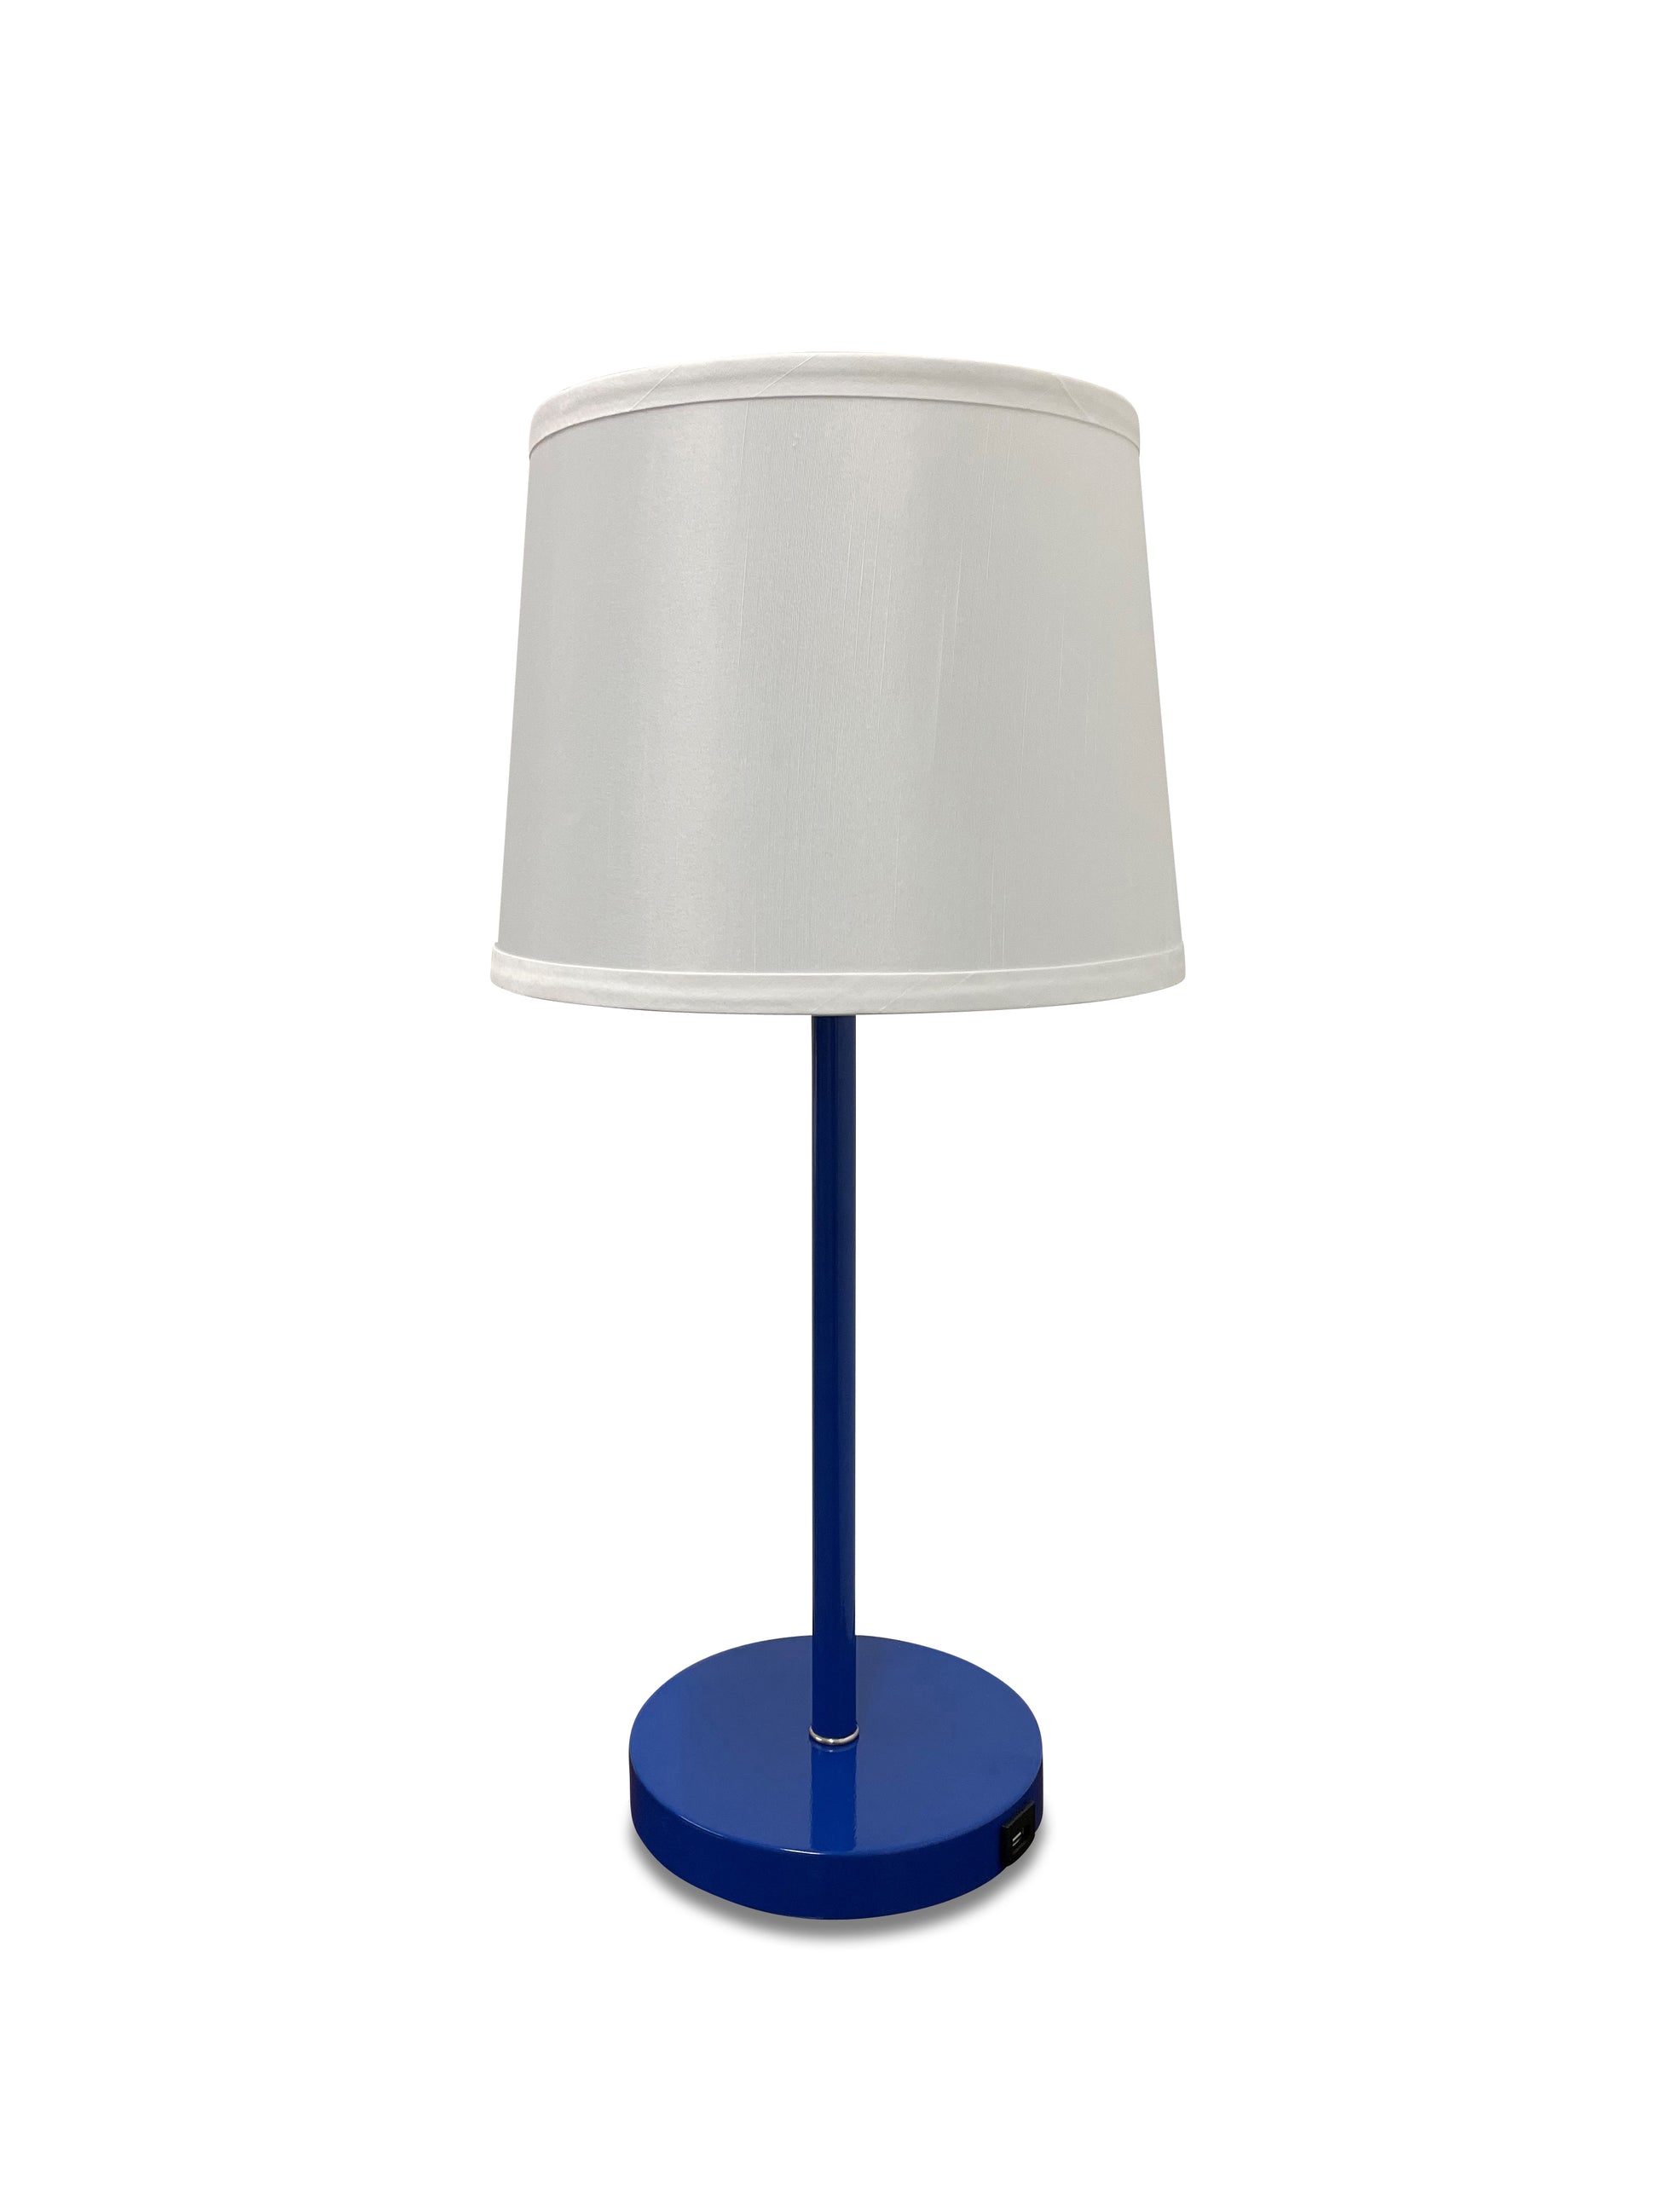 House of Troy Sawyer Cobalt/Satin Nickel Table Lamp with USB S550-COSN